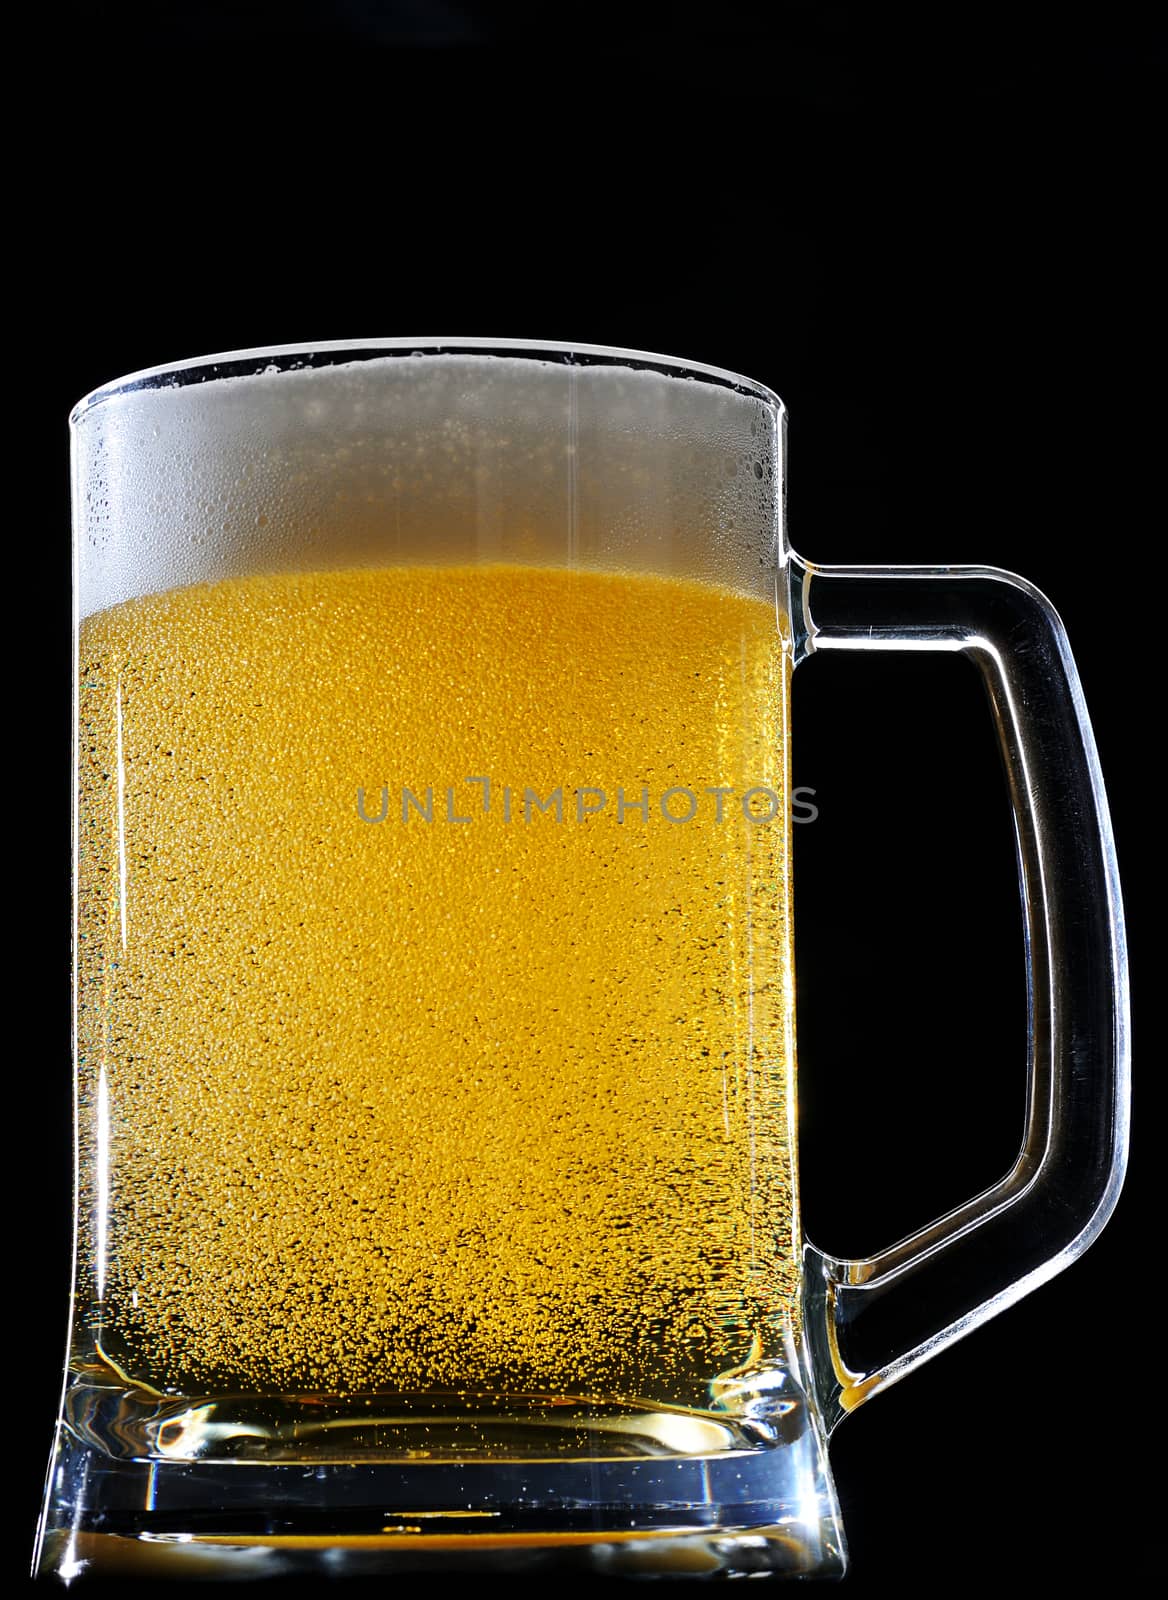 Sparkles in yellow beer glass on black background